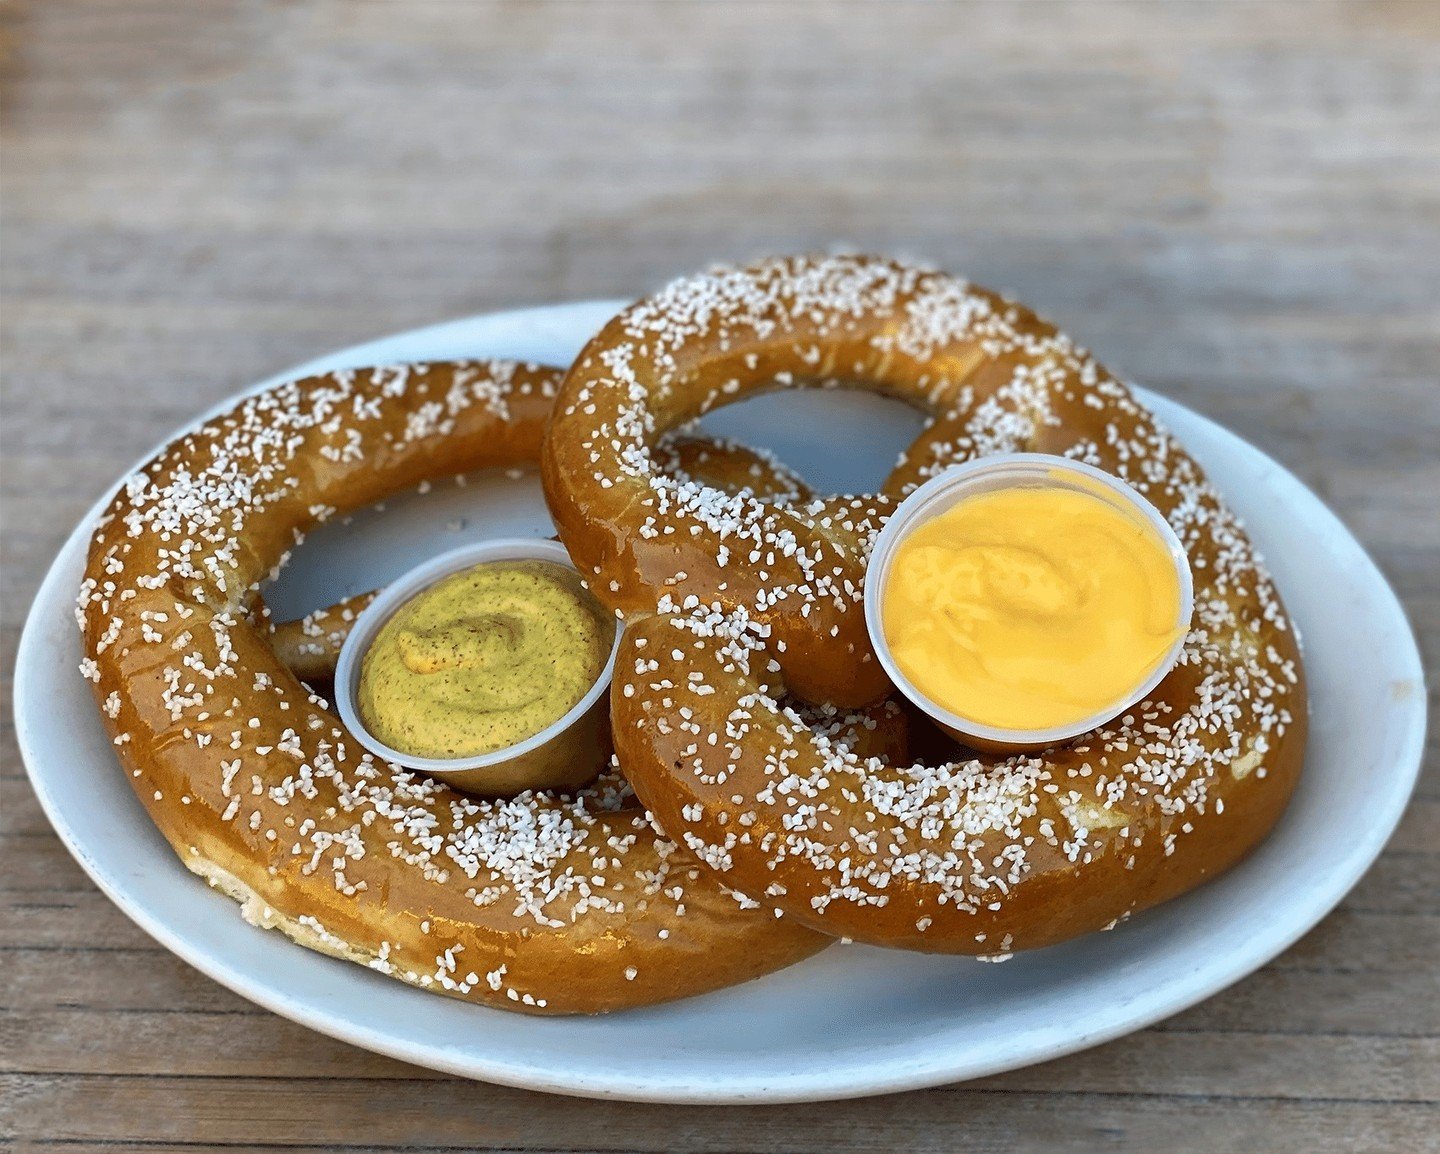 Did you know April is National Soft Pretzel Month? For our Pretzels, we start with two Turano Baking Co. salted pretzel twists, bake them to order so they are piping hot, and serve 'em with housemade cheddar cheese sauce and spicy mustard. Pairs perf